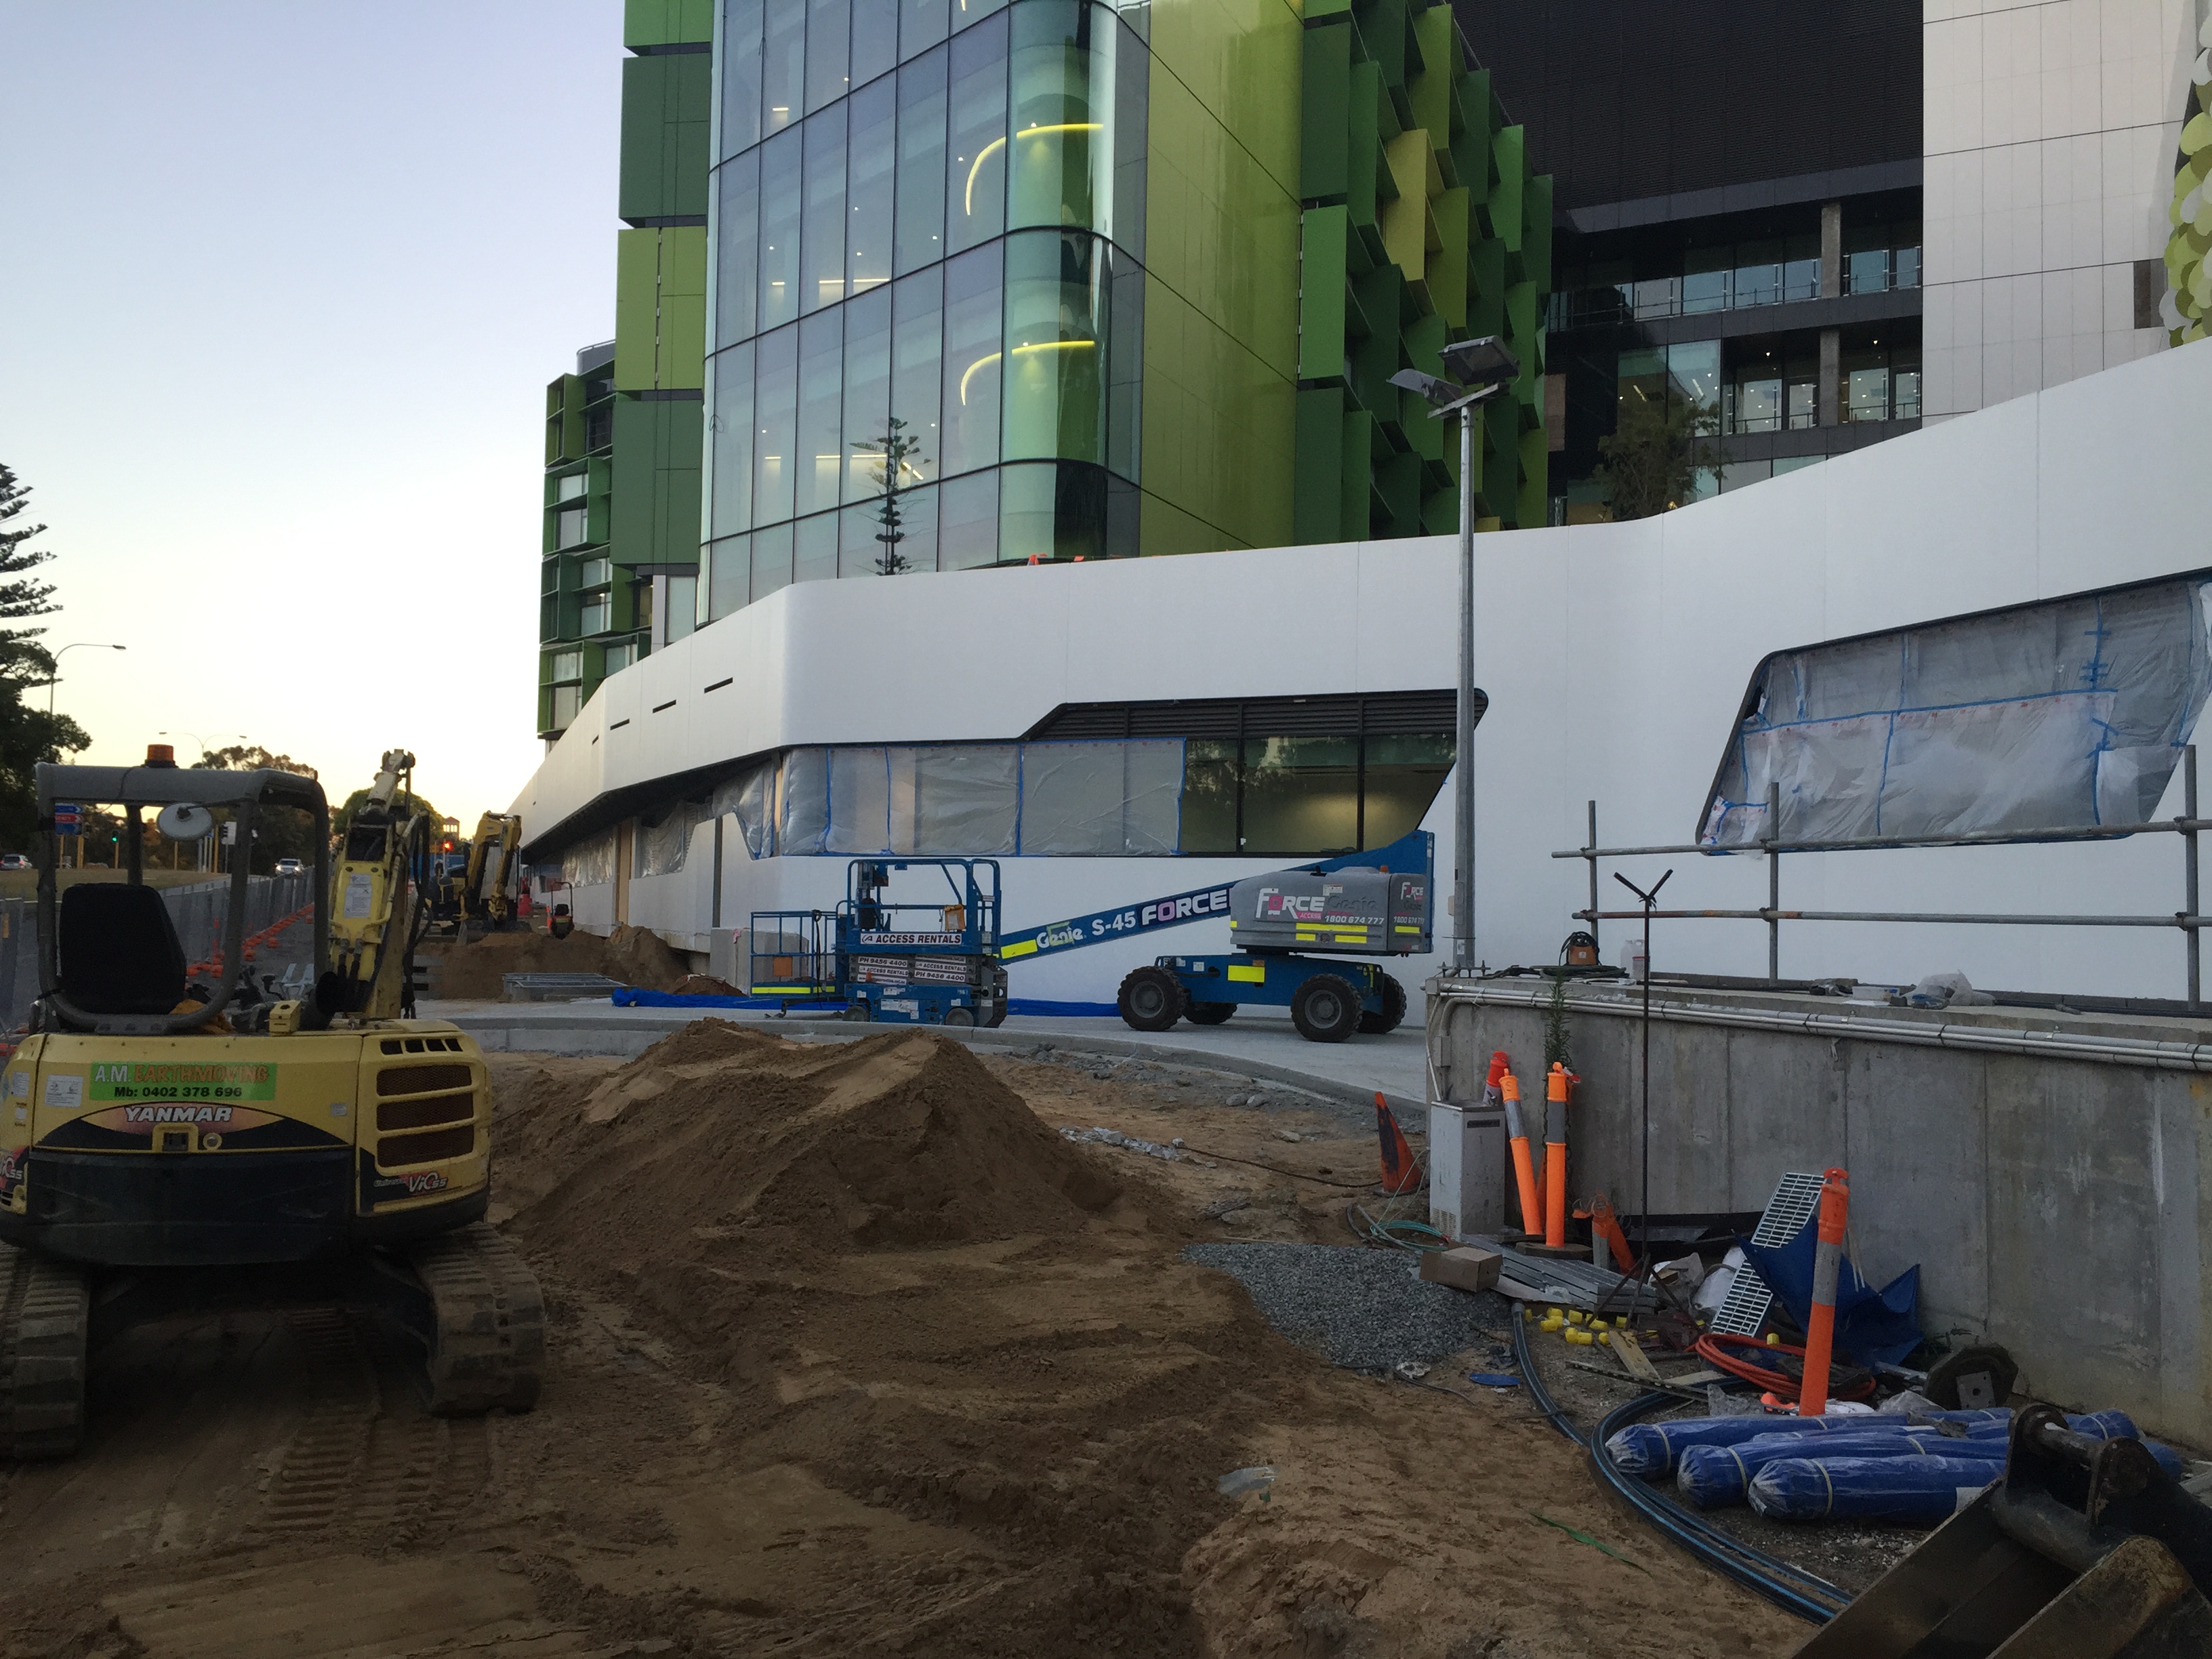 Perth’s Childrens Hospital Project